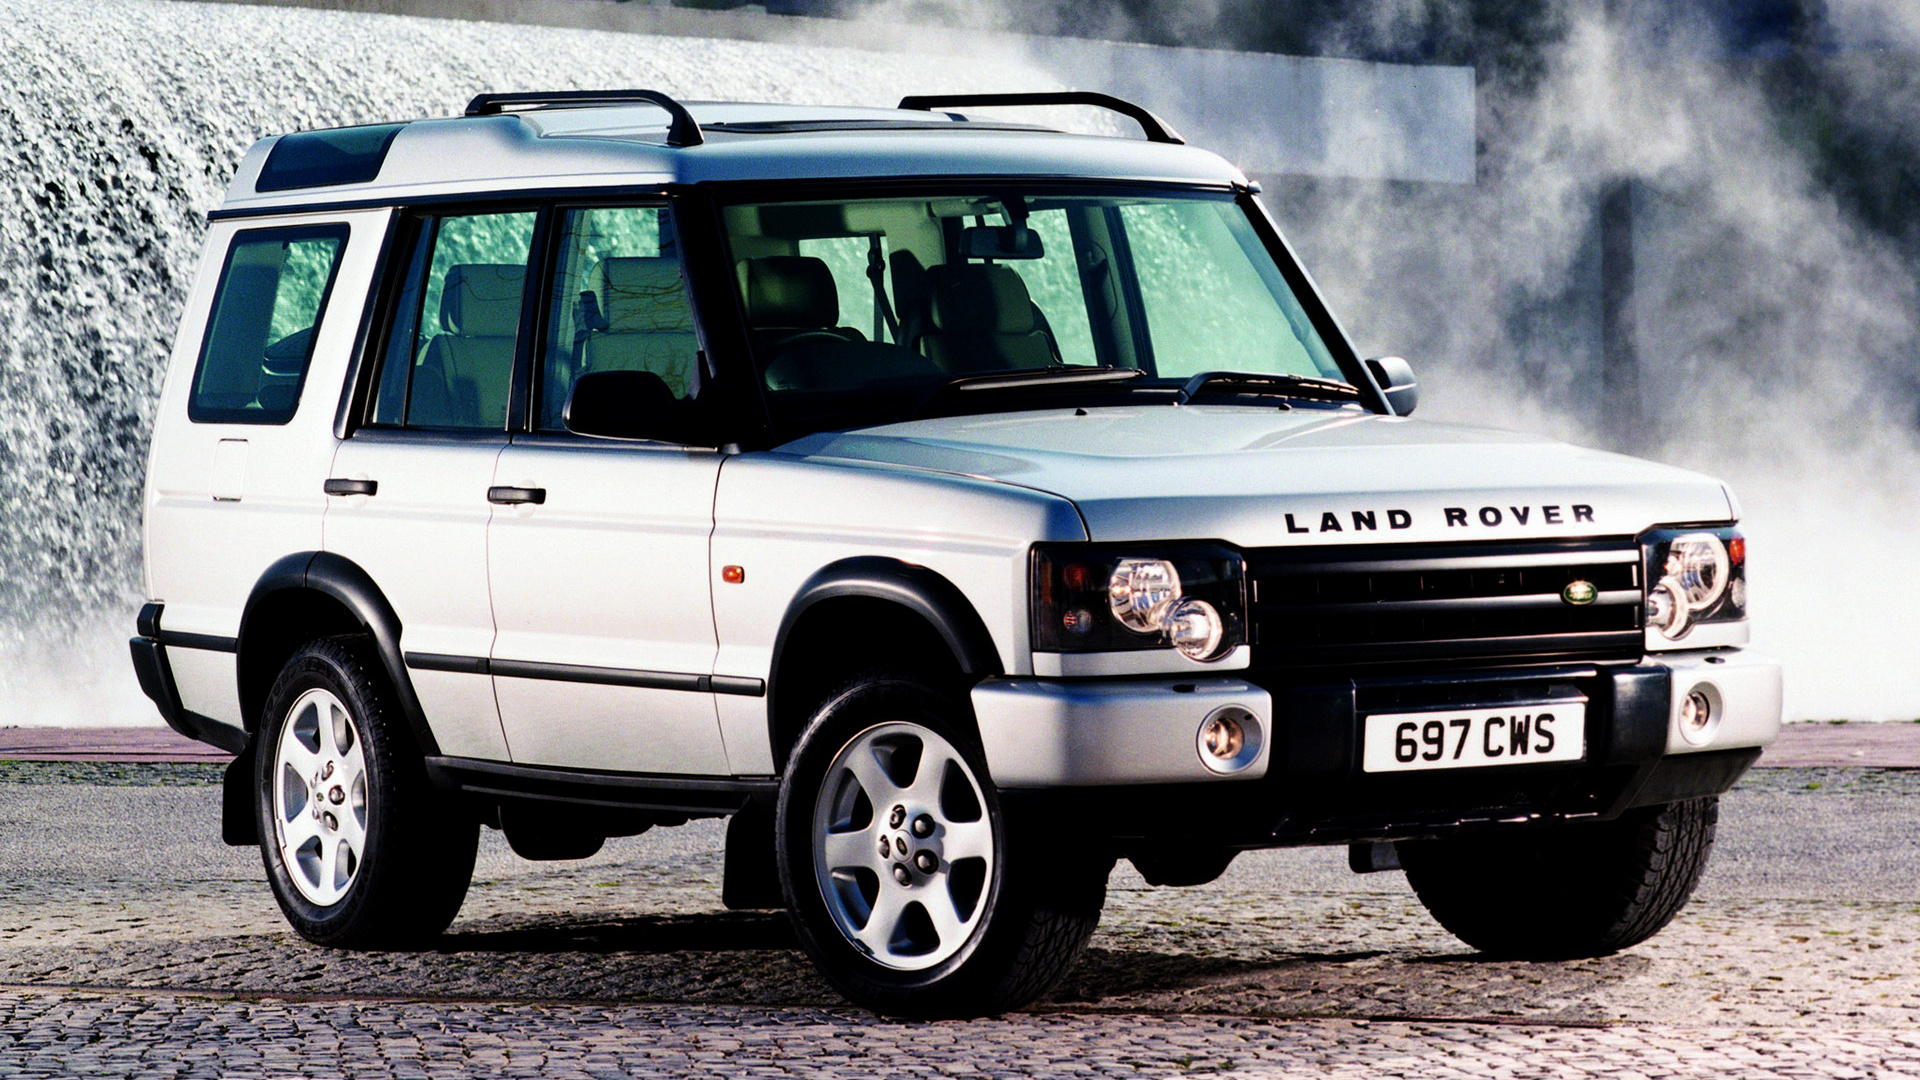 2002 Land Rover Discovery (UK) - Wallpapers and HD Images | Car Pixel